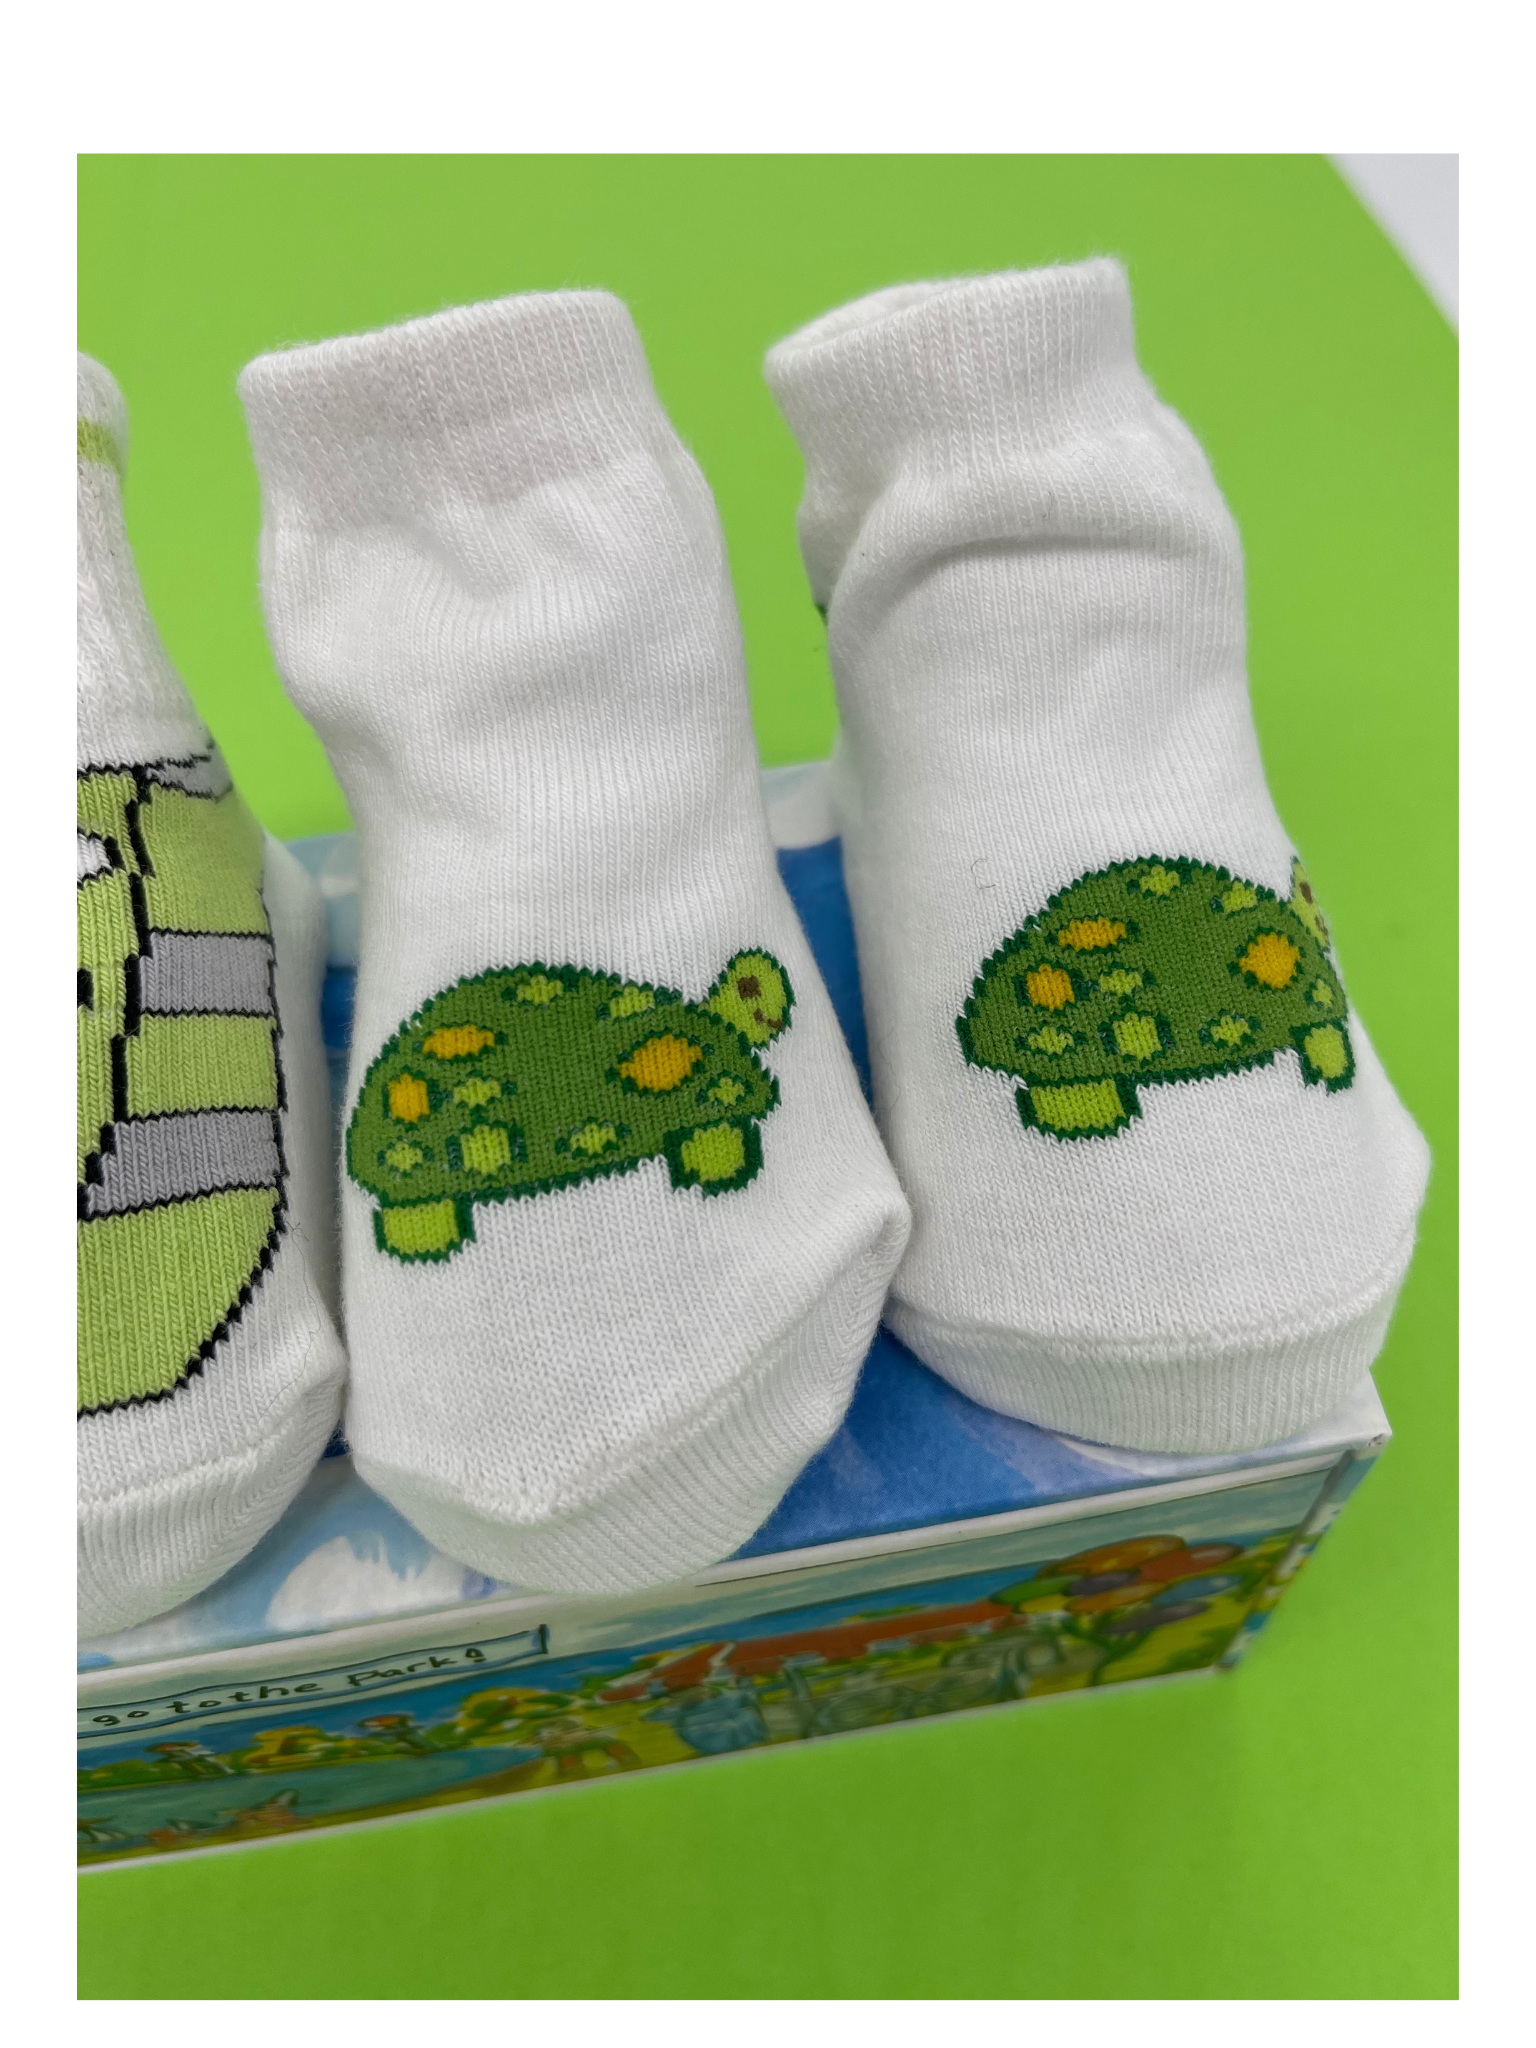 Baby Socks~3 Pair/Let's Go To the Park